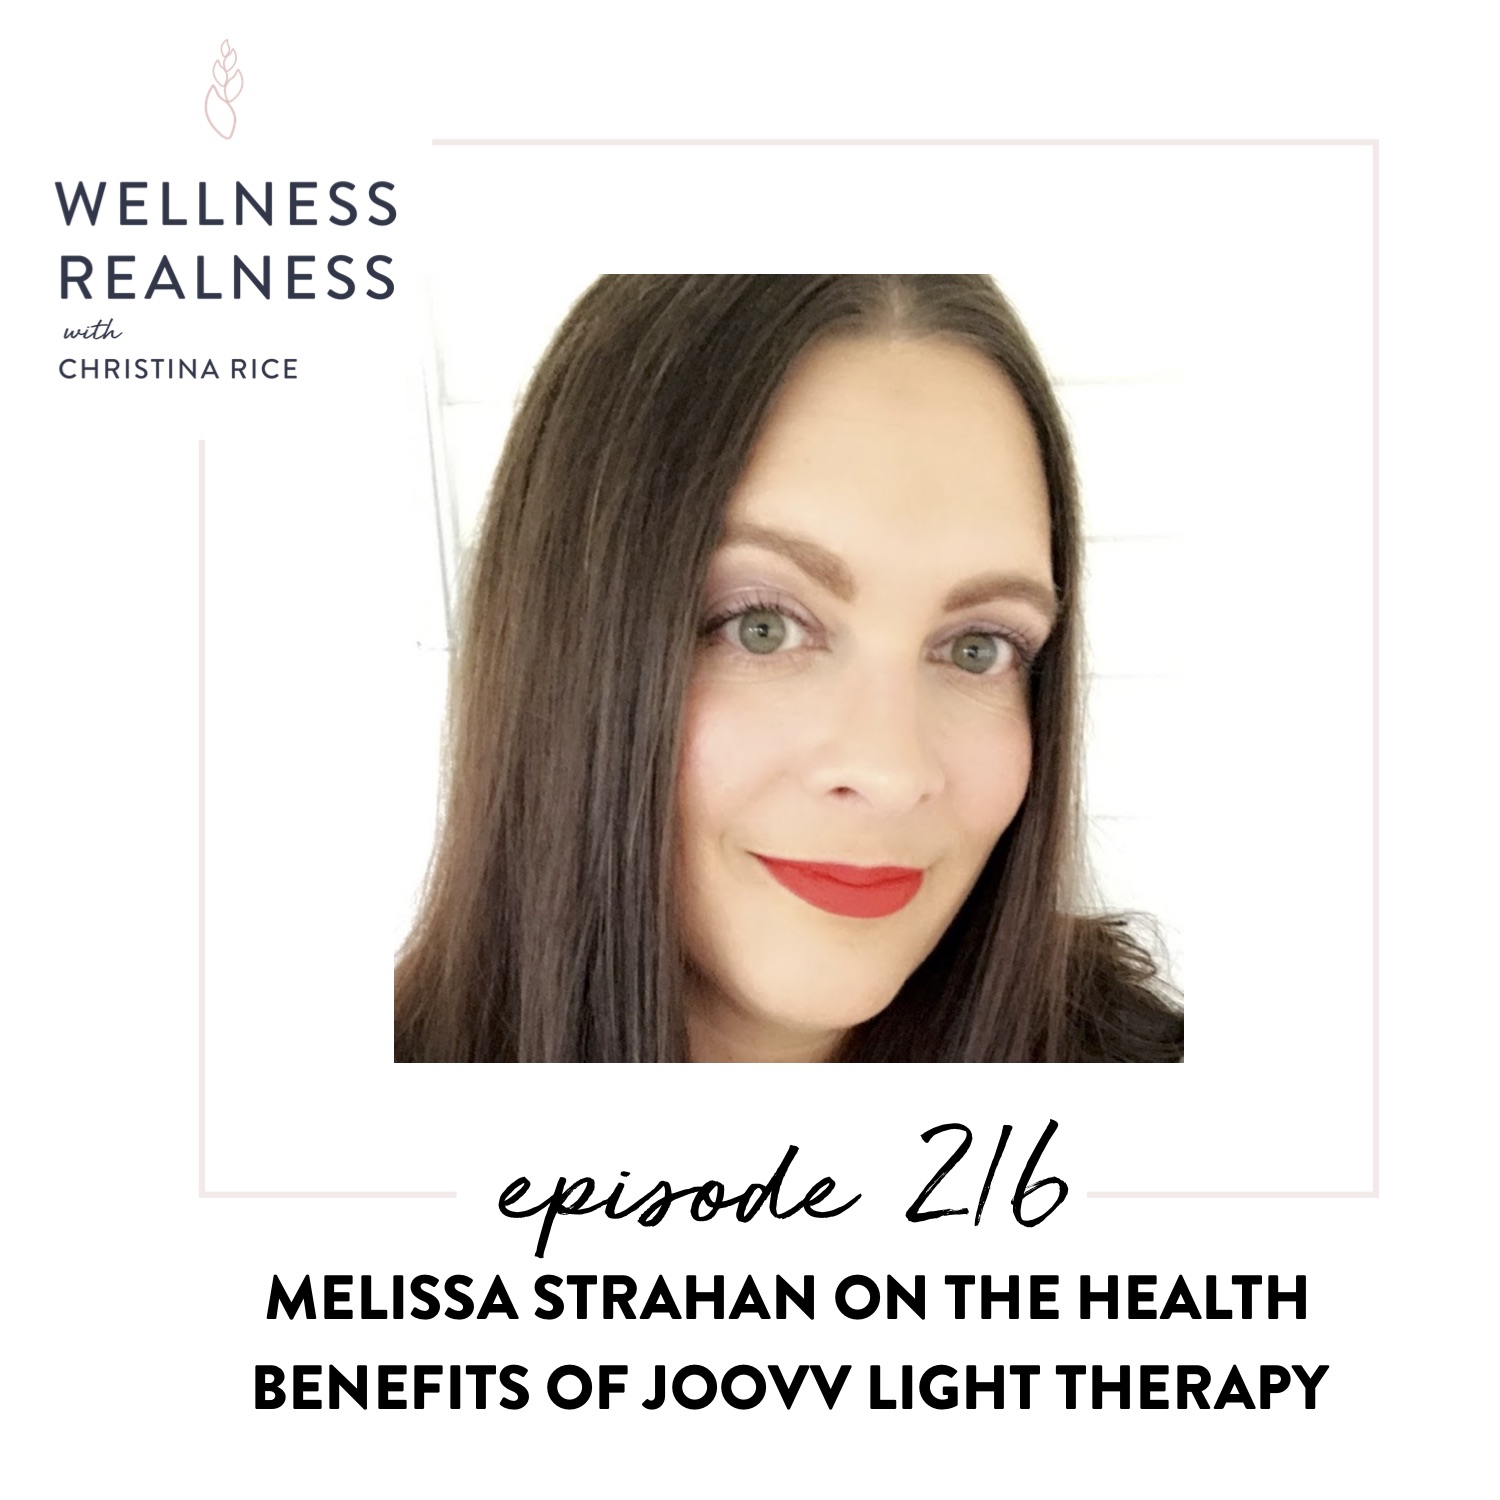 216: Melissa Strahan on the Health Benefits of Joovv Light Therapy